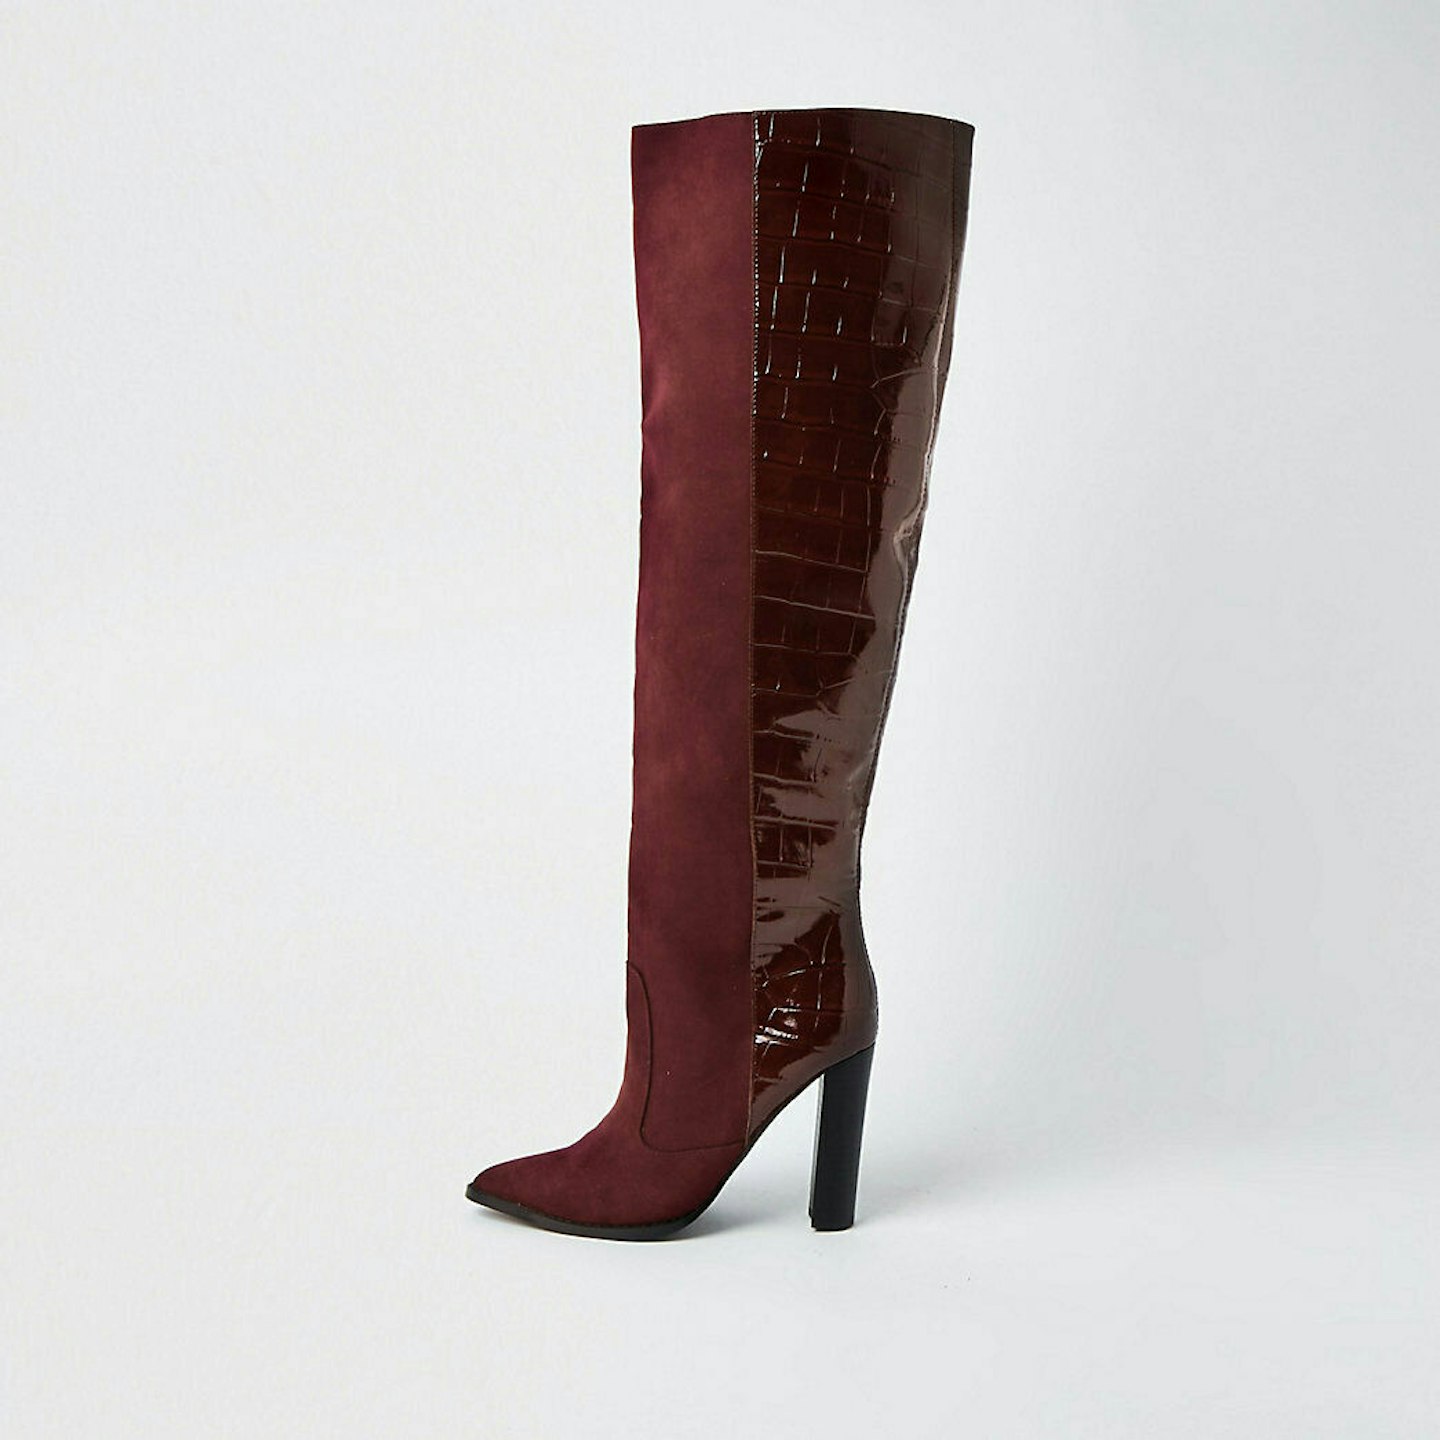 River Island, Knee High Boots, £25.20